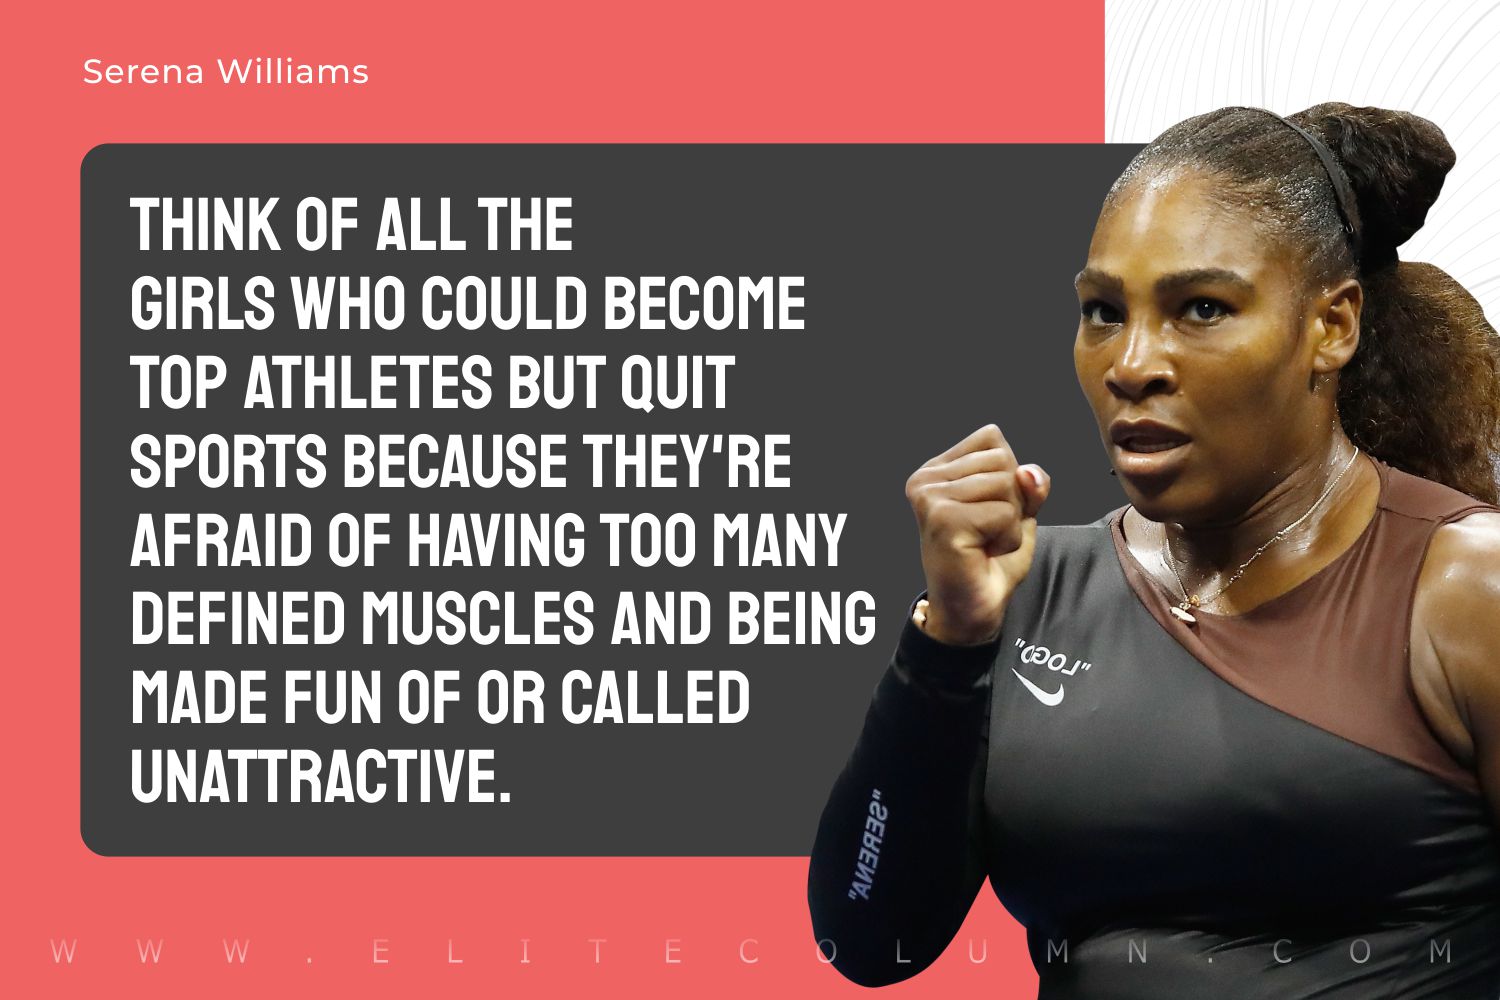 Serena Williams quote: I decided I can't pay a person to rewind time